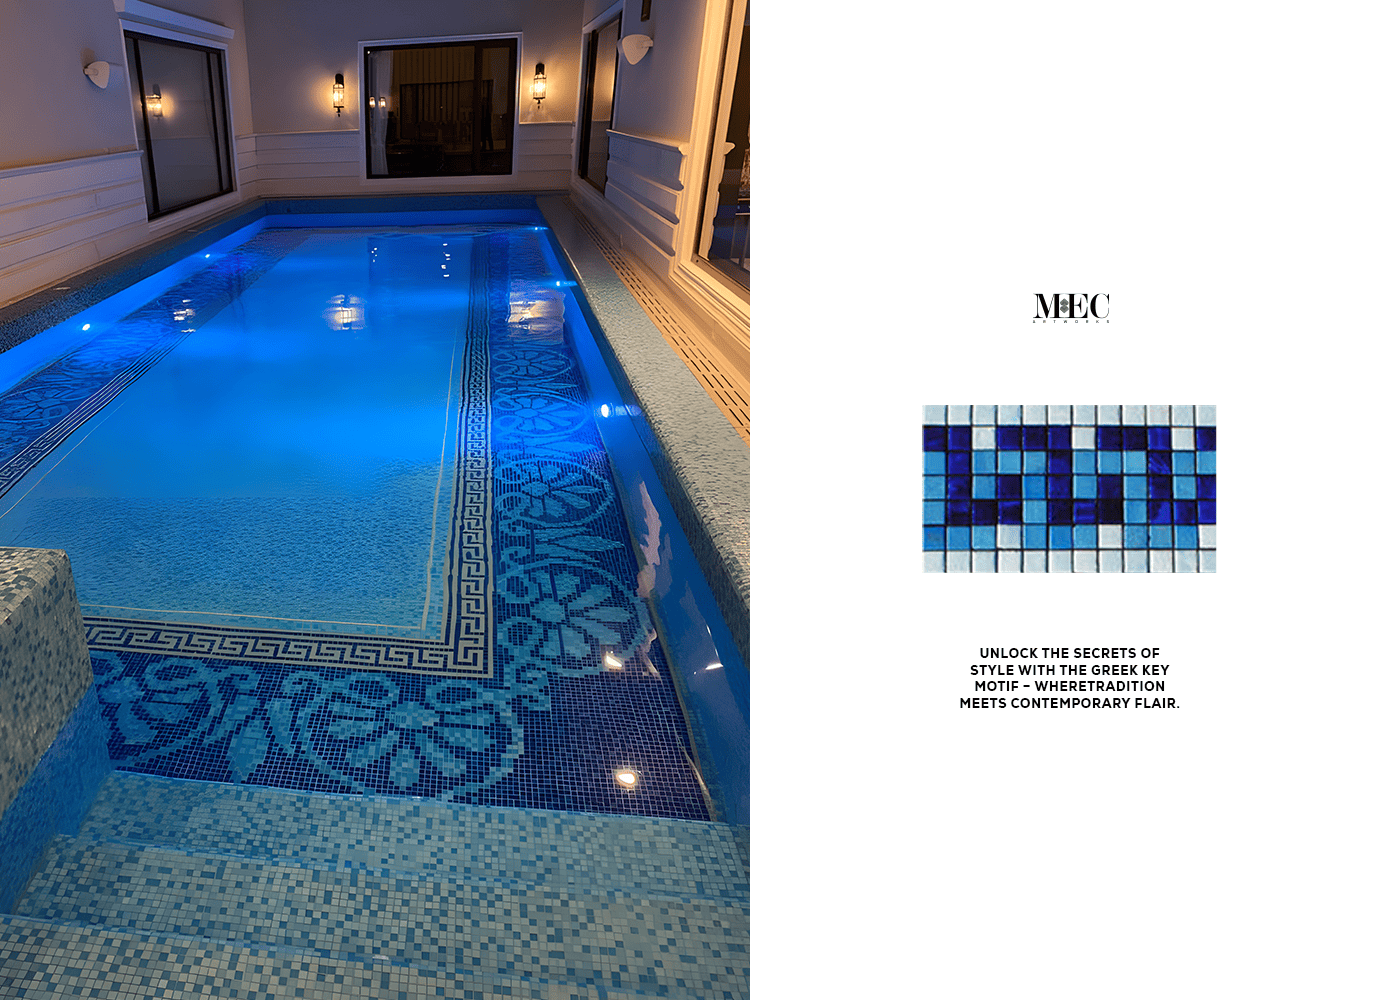 A serene pool with intricate mosaic designs, illuminated under the soft glow of evening lights, adjacent to a modern living space.